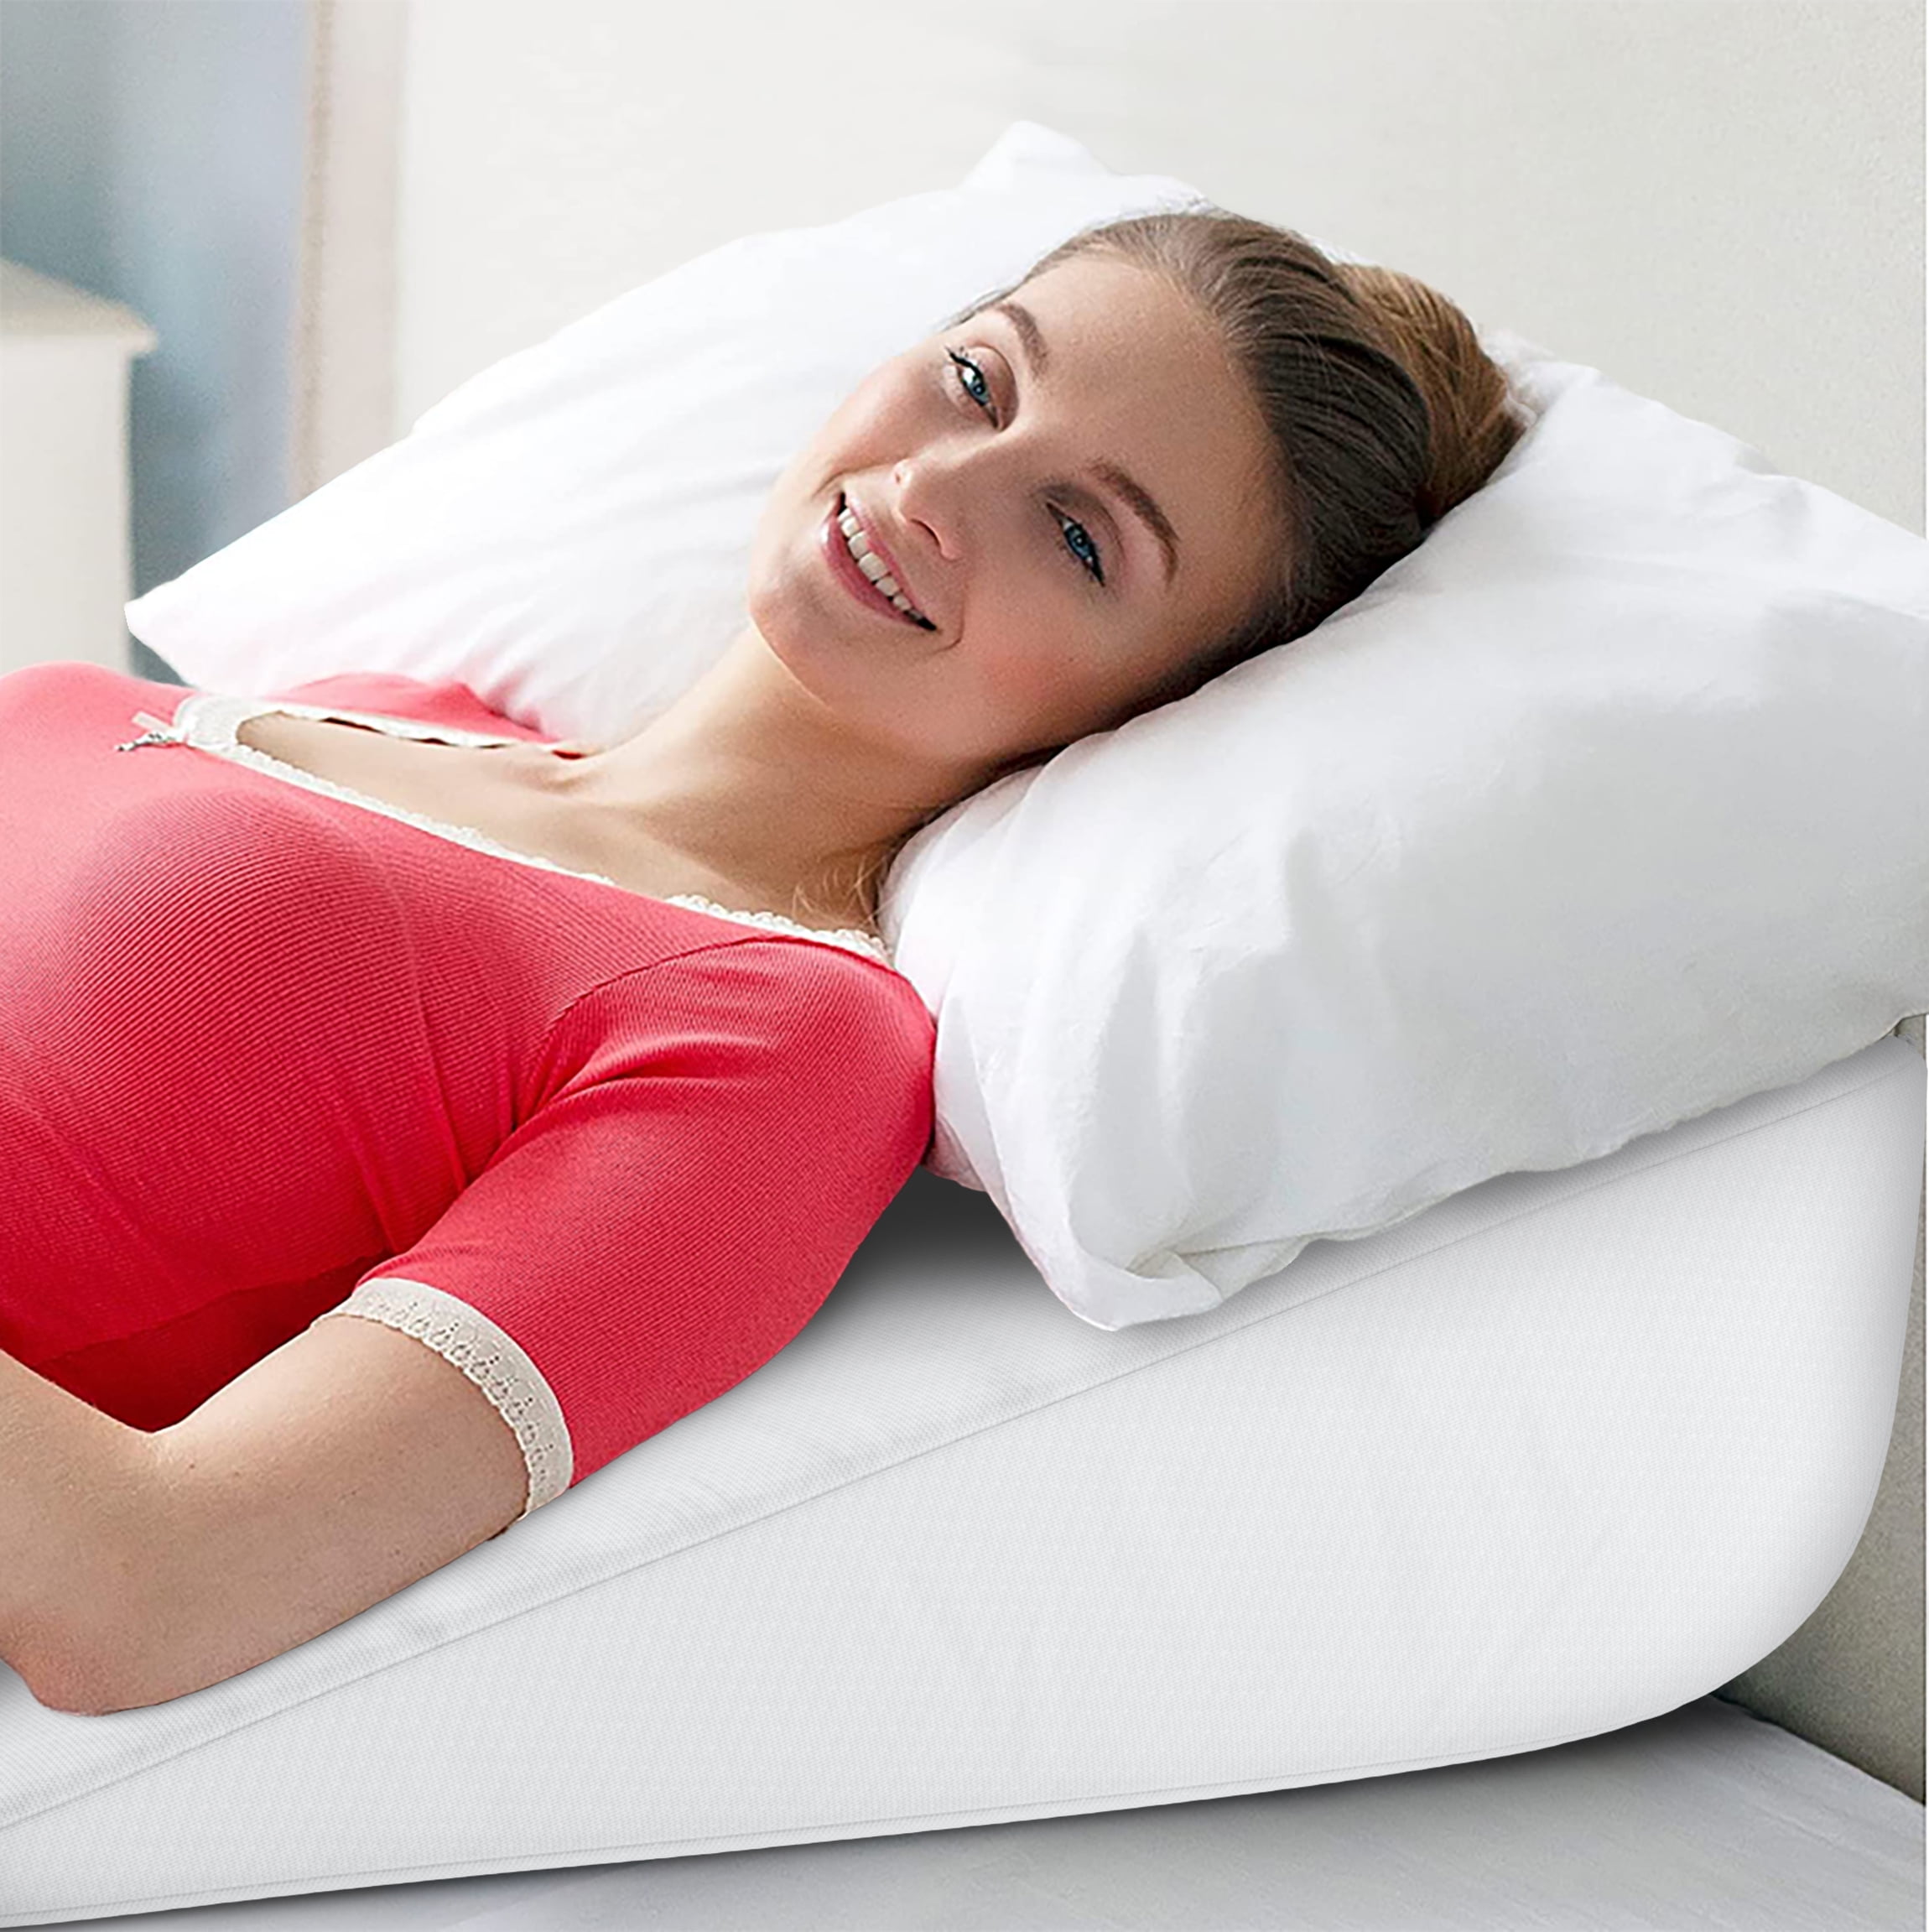 Bed Wedge Pillow, Unique Curved Design for Multi Position Use, Memory  Foam Wedge Pillow for Sleeping, Works for Back Support, Leg, Knee